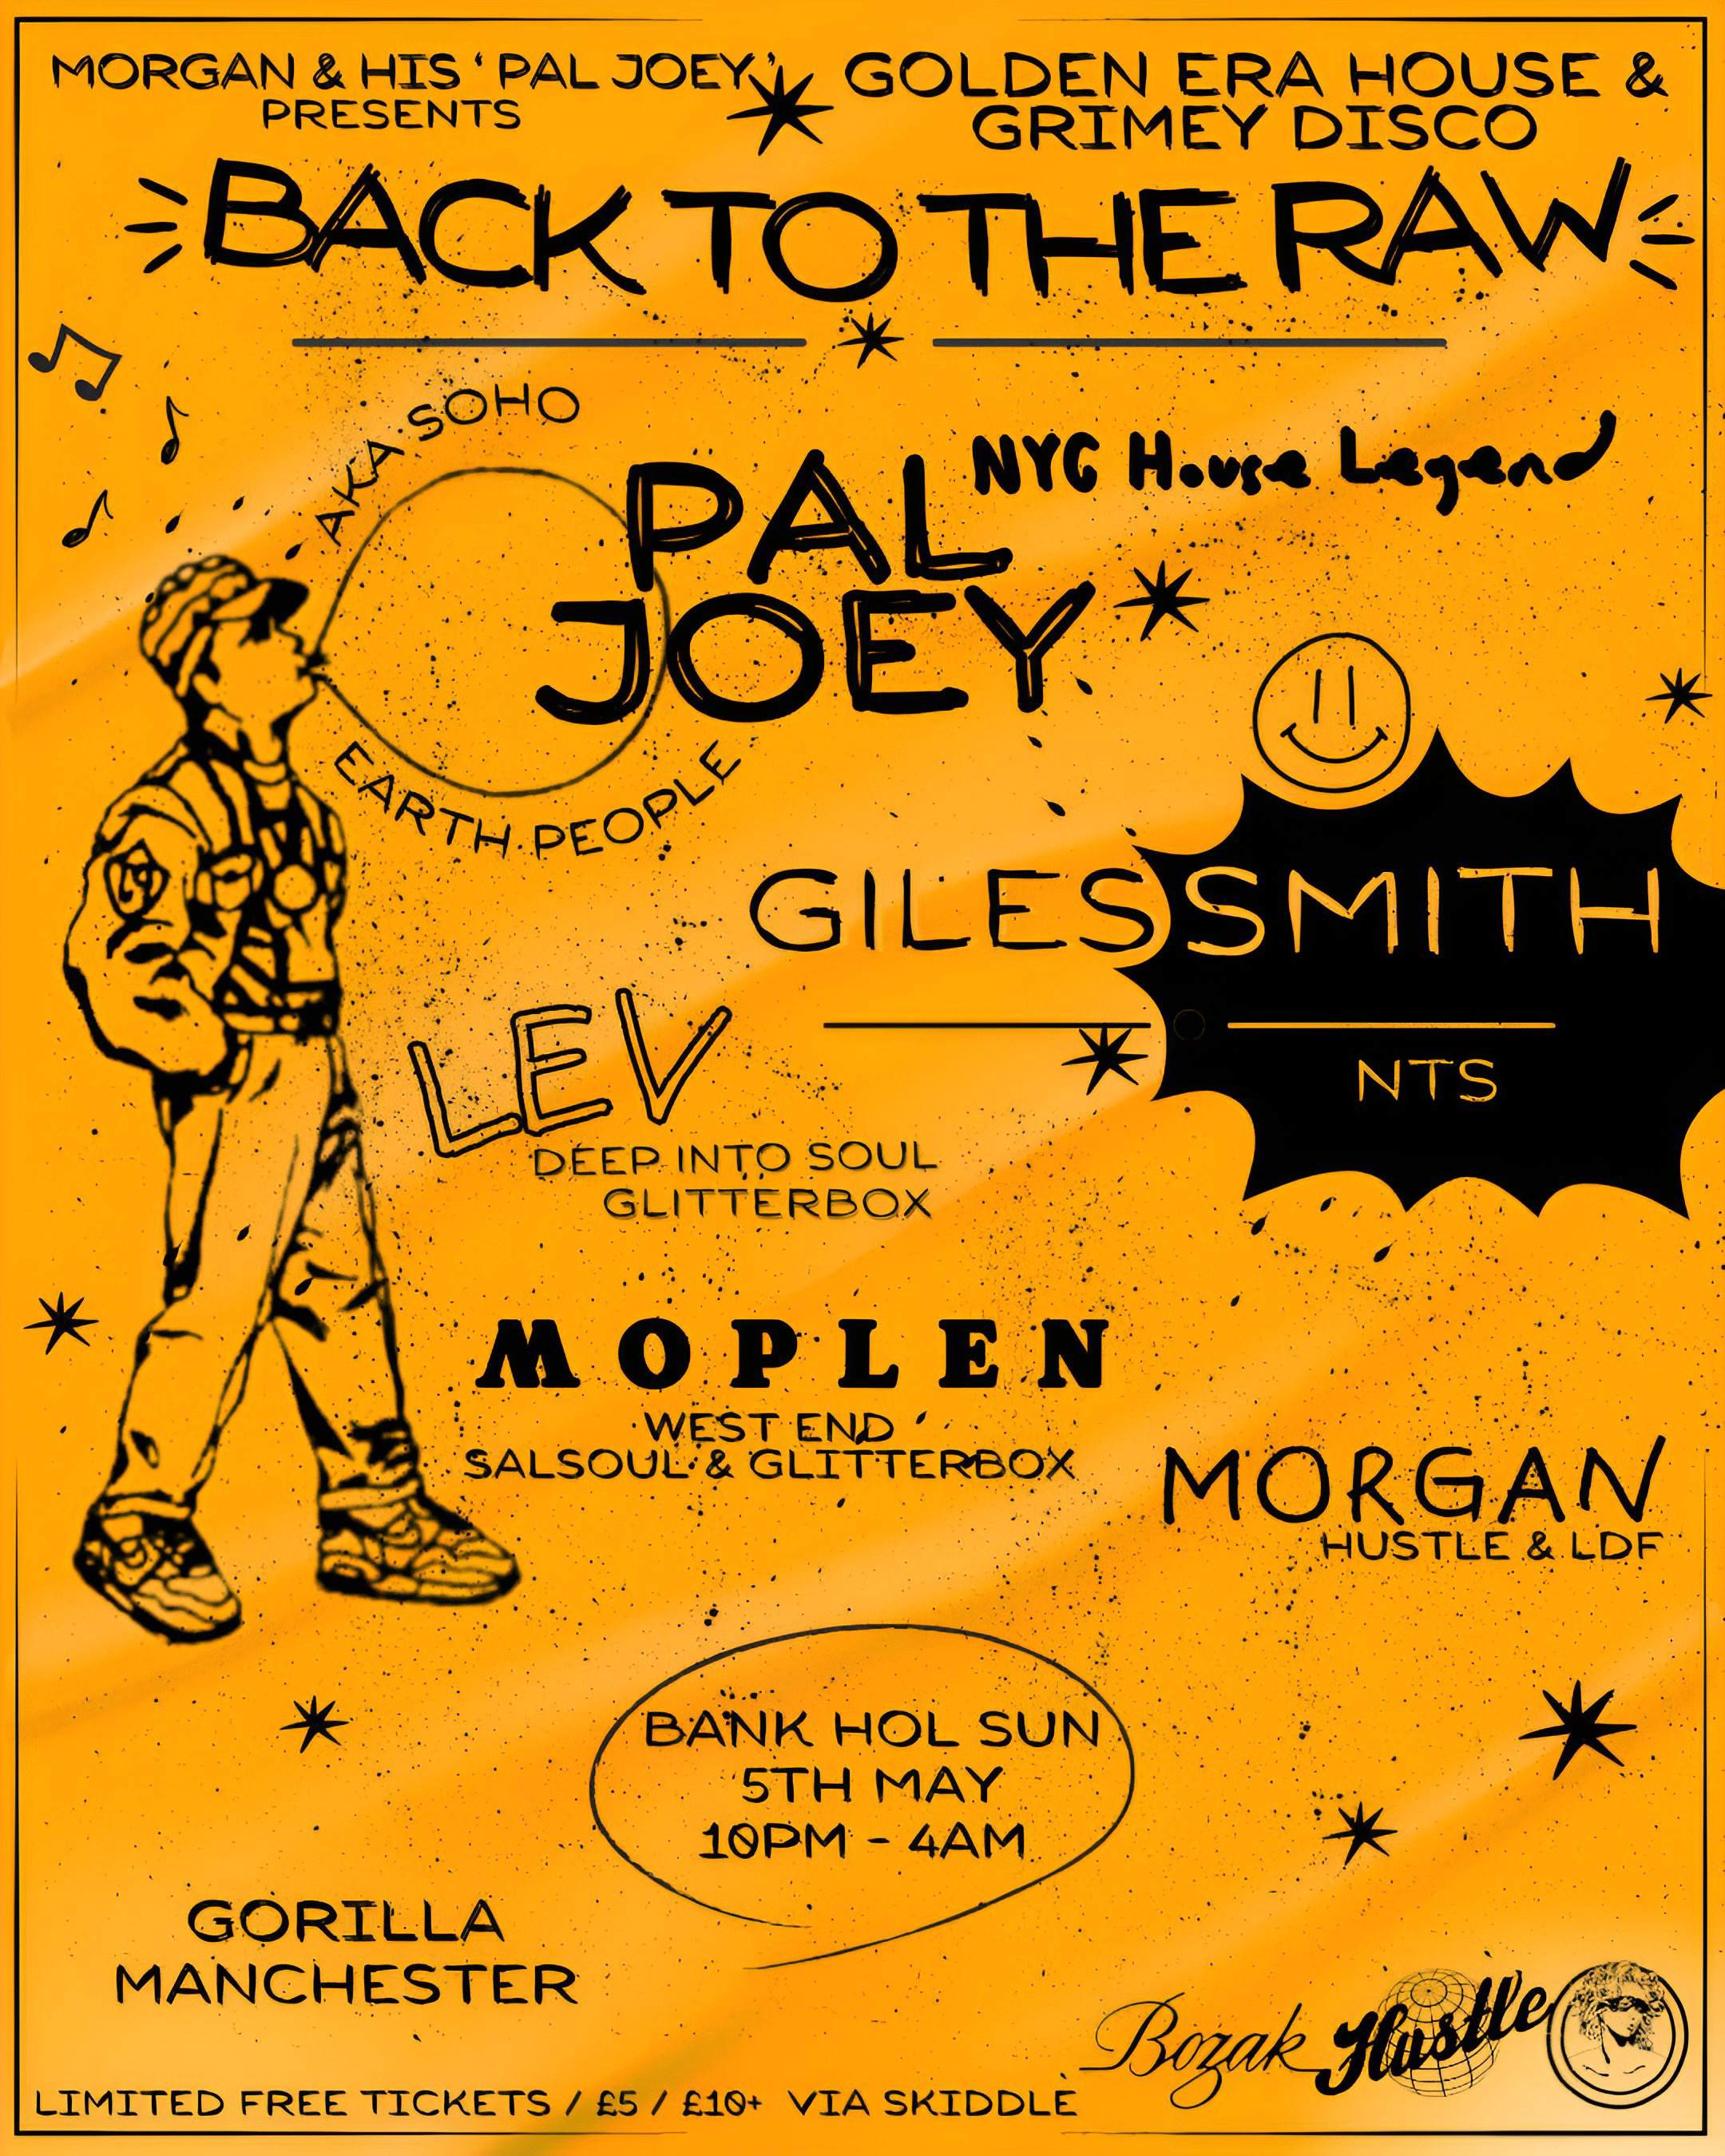 Back To The Raw with Pal Joey, Giles Smith, Lev, Moplen & Morgan  - フライヤー表